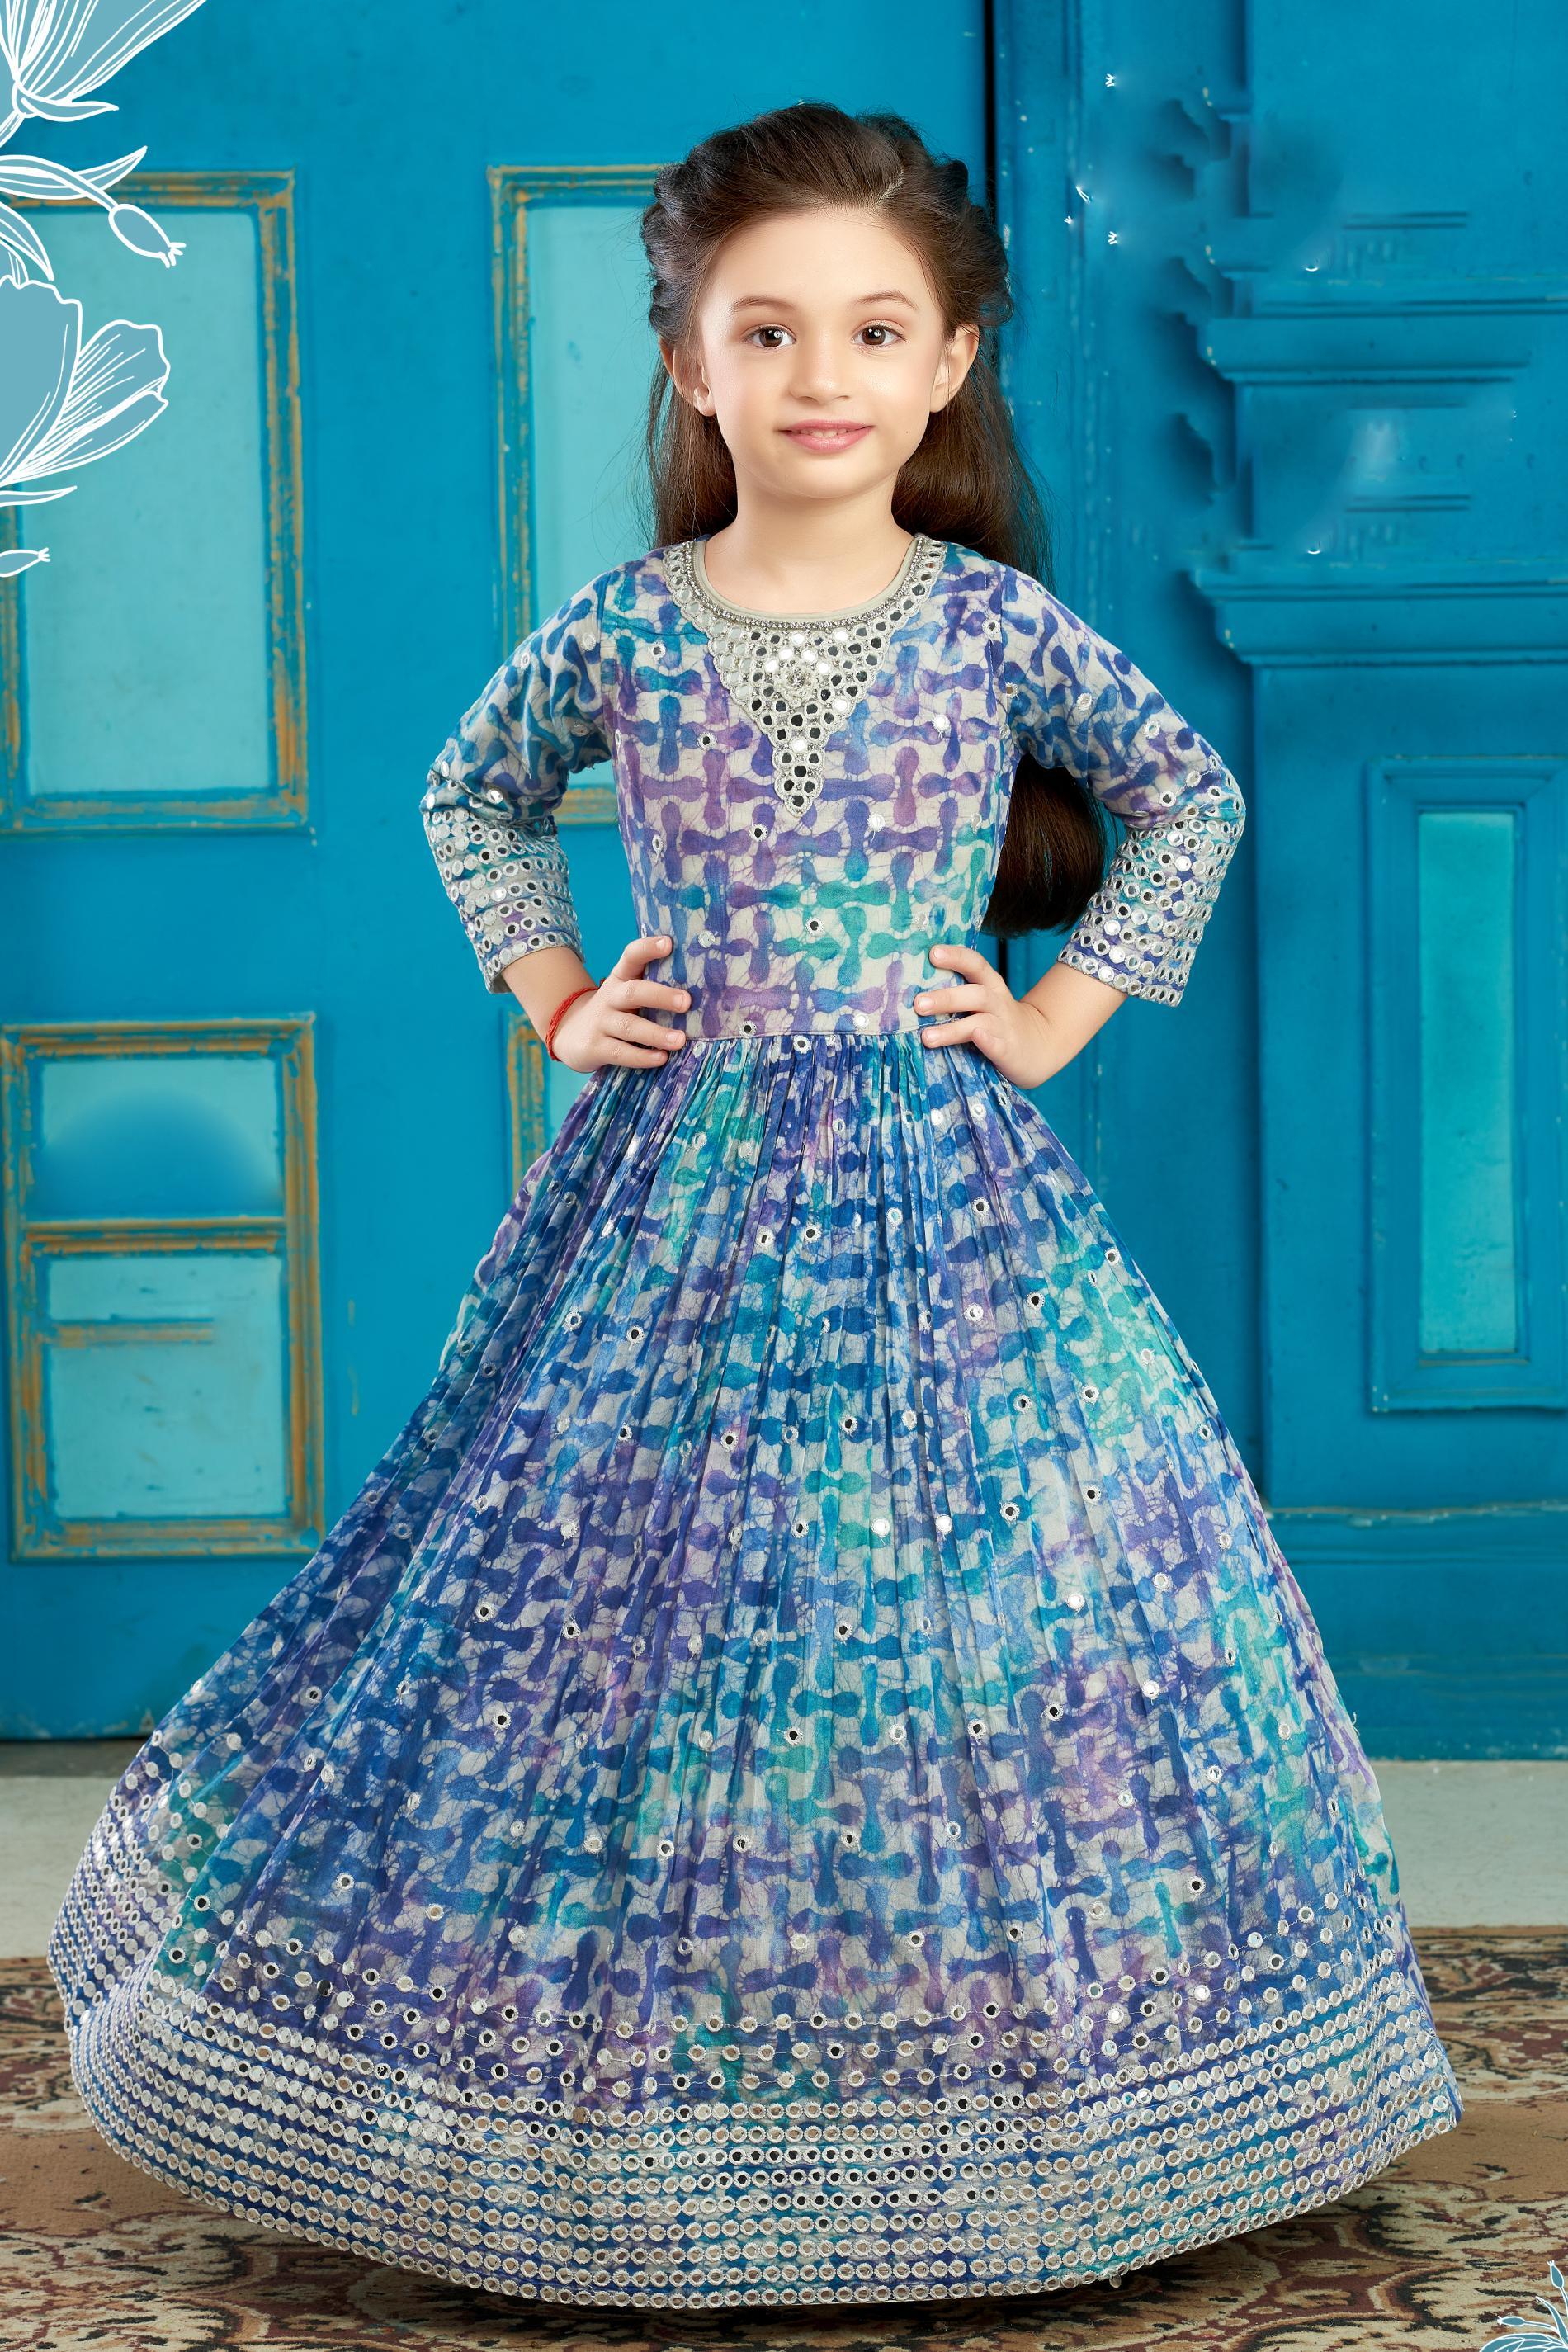 Designer Ice Blue Crystal Beaded Chiffon A Line Pageant Dress For Little  Girls Perfect For Birthday, Formal Party Wear, And Formal Occasion  Available In Infant, Toddler, Teens Sizes From Uniquebridalboutique, $92.69  |